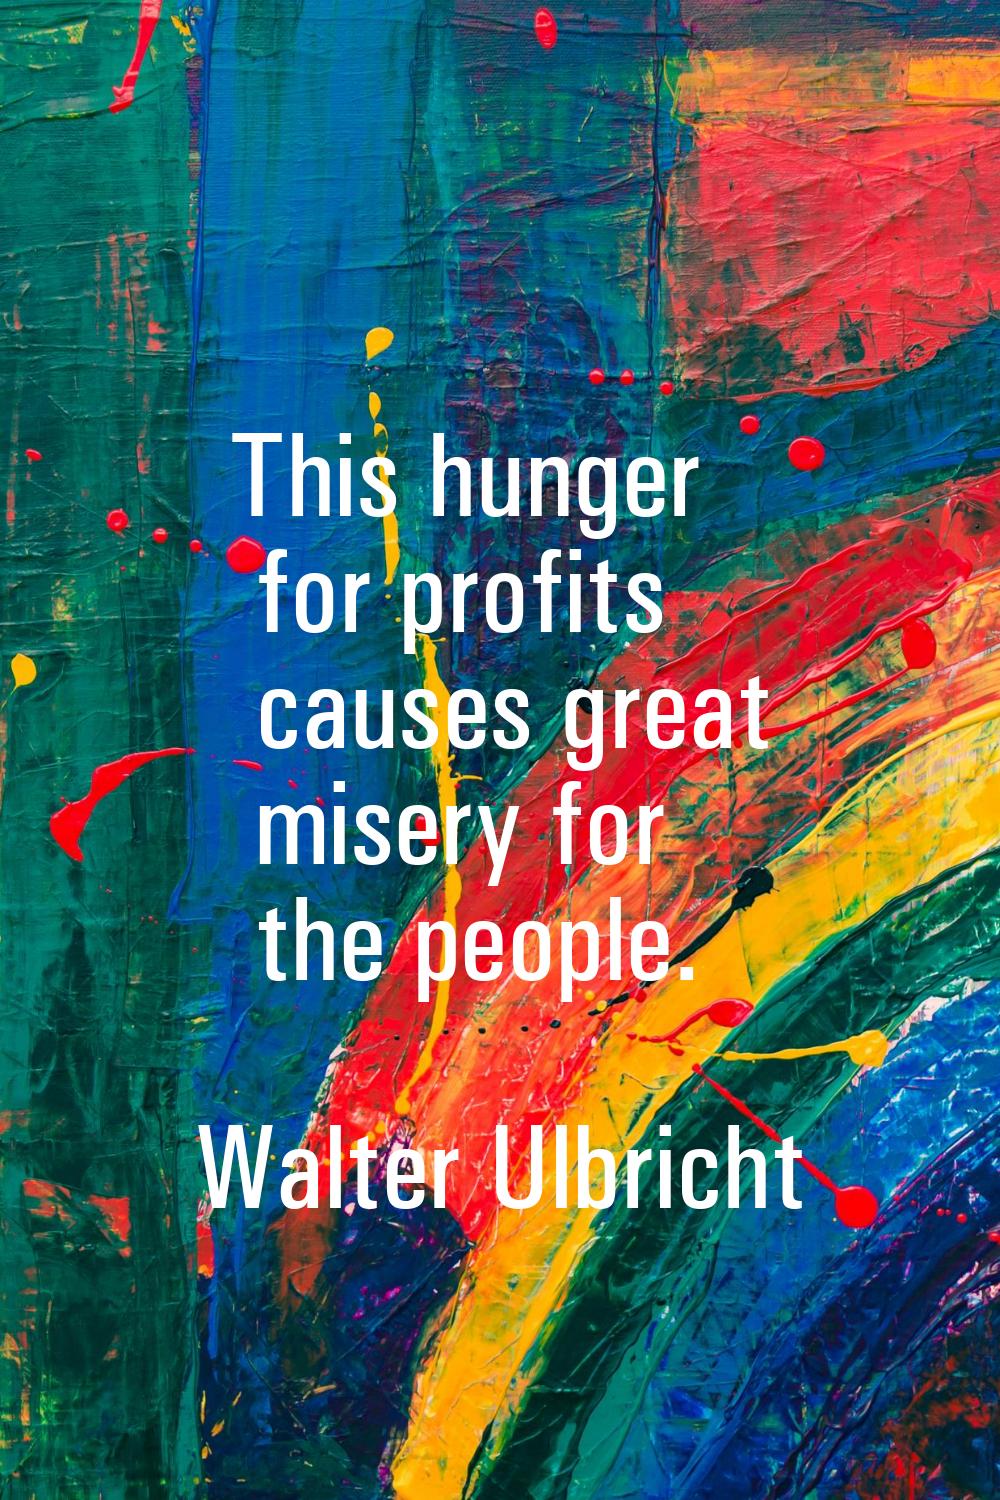 This hunger for profits causes great misery for the people.